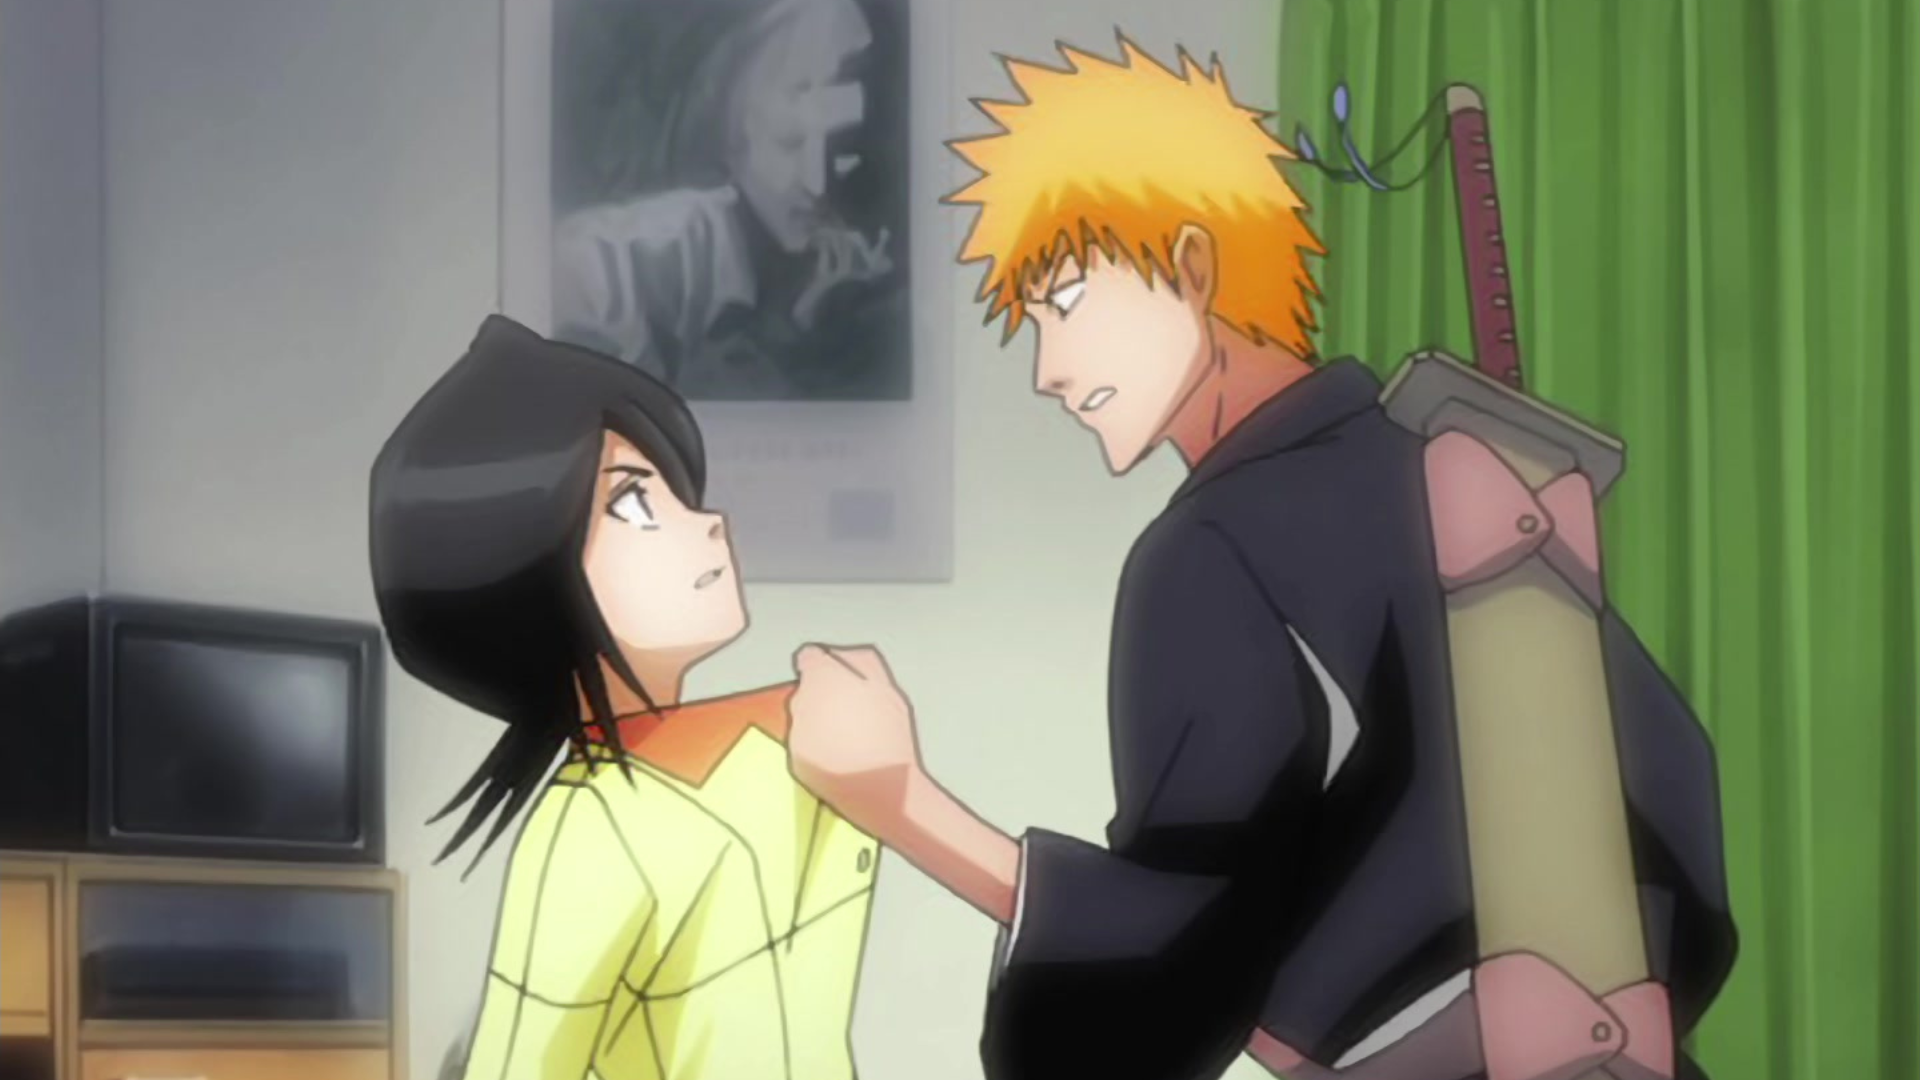 Review: Bleach Episode 3 Is Action-Packed & Heartbreaking